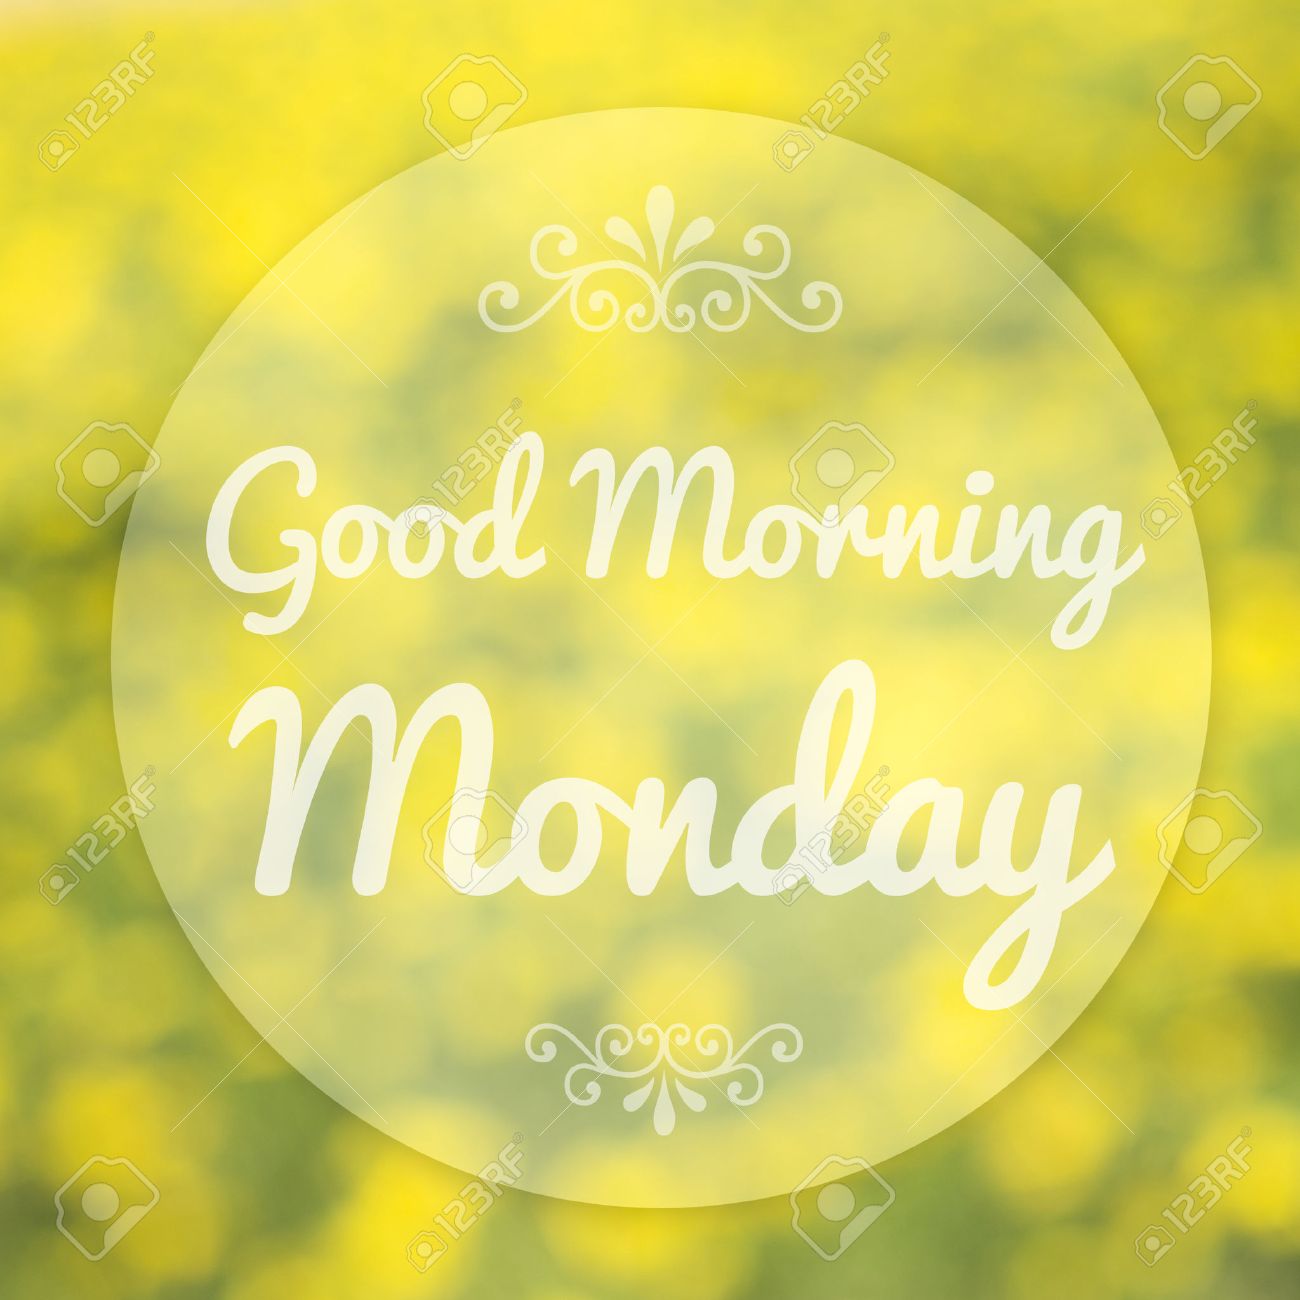 Good Morning Monday On Blur Background Stock Photo Picture And